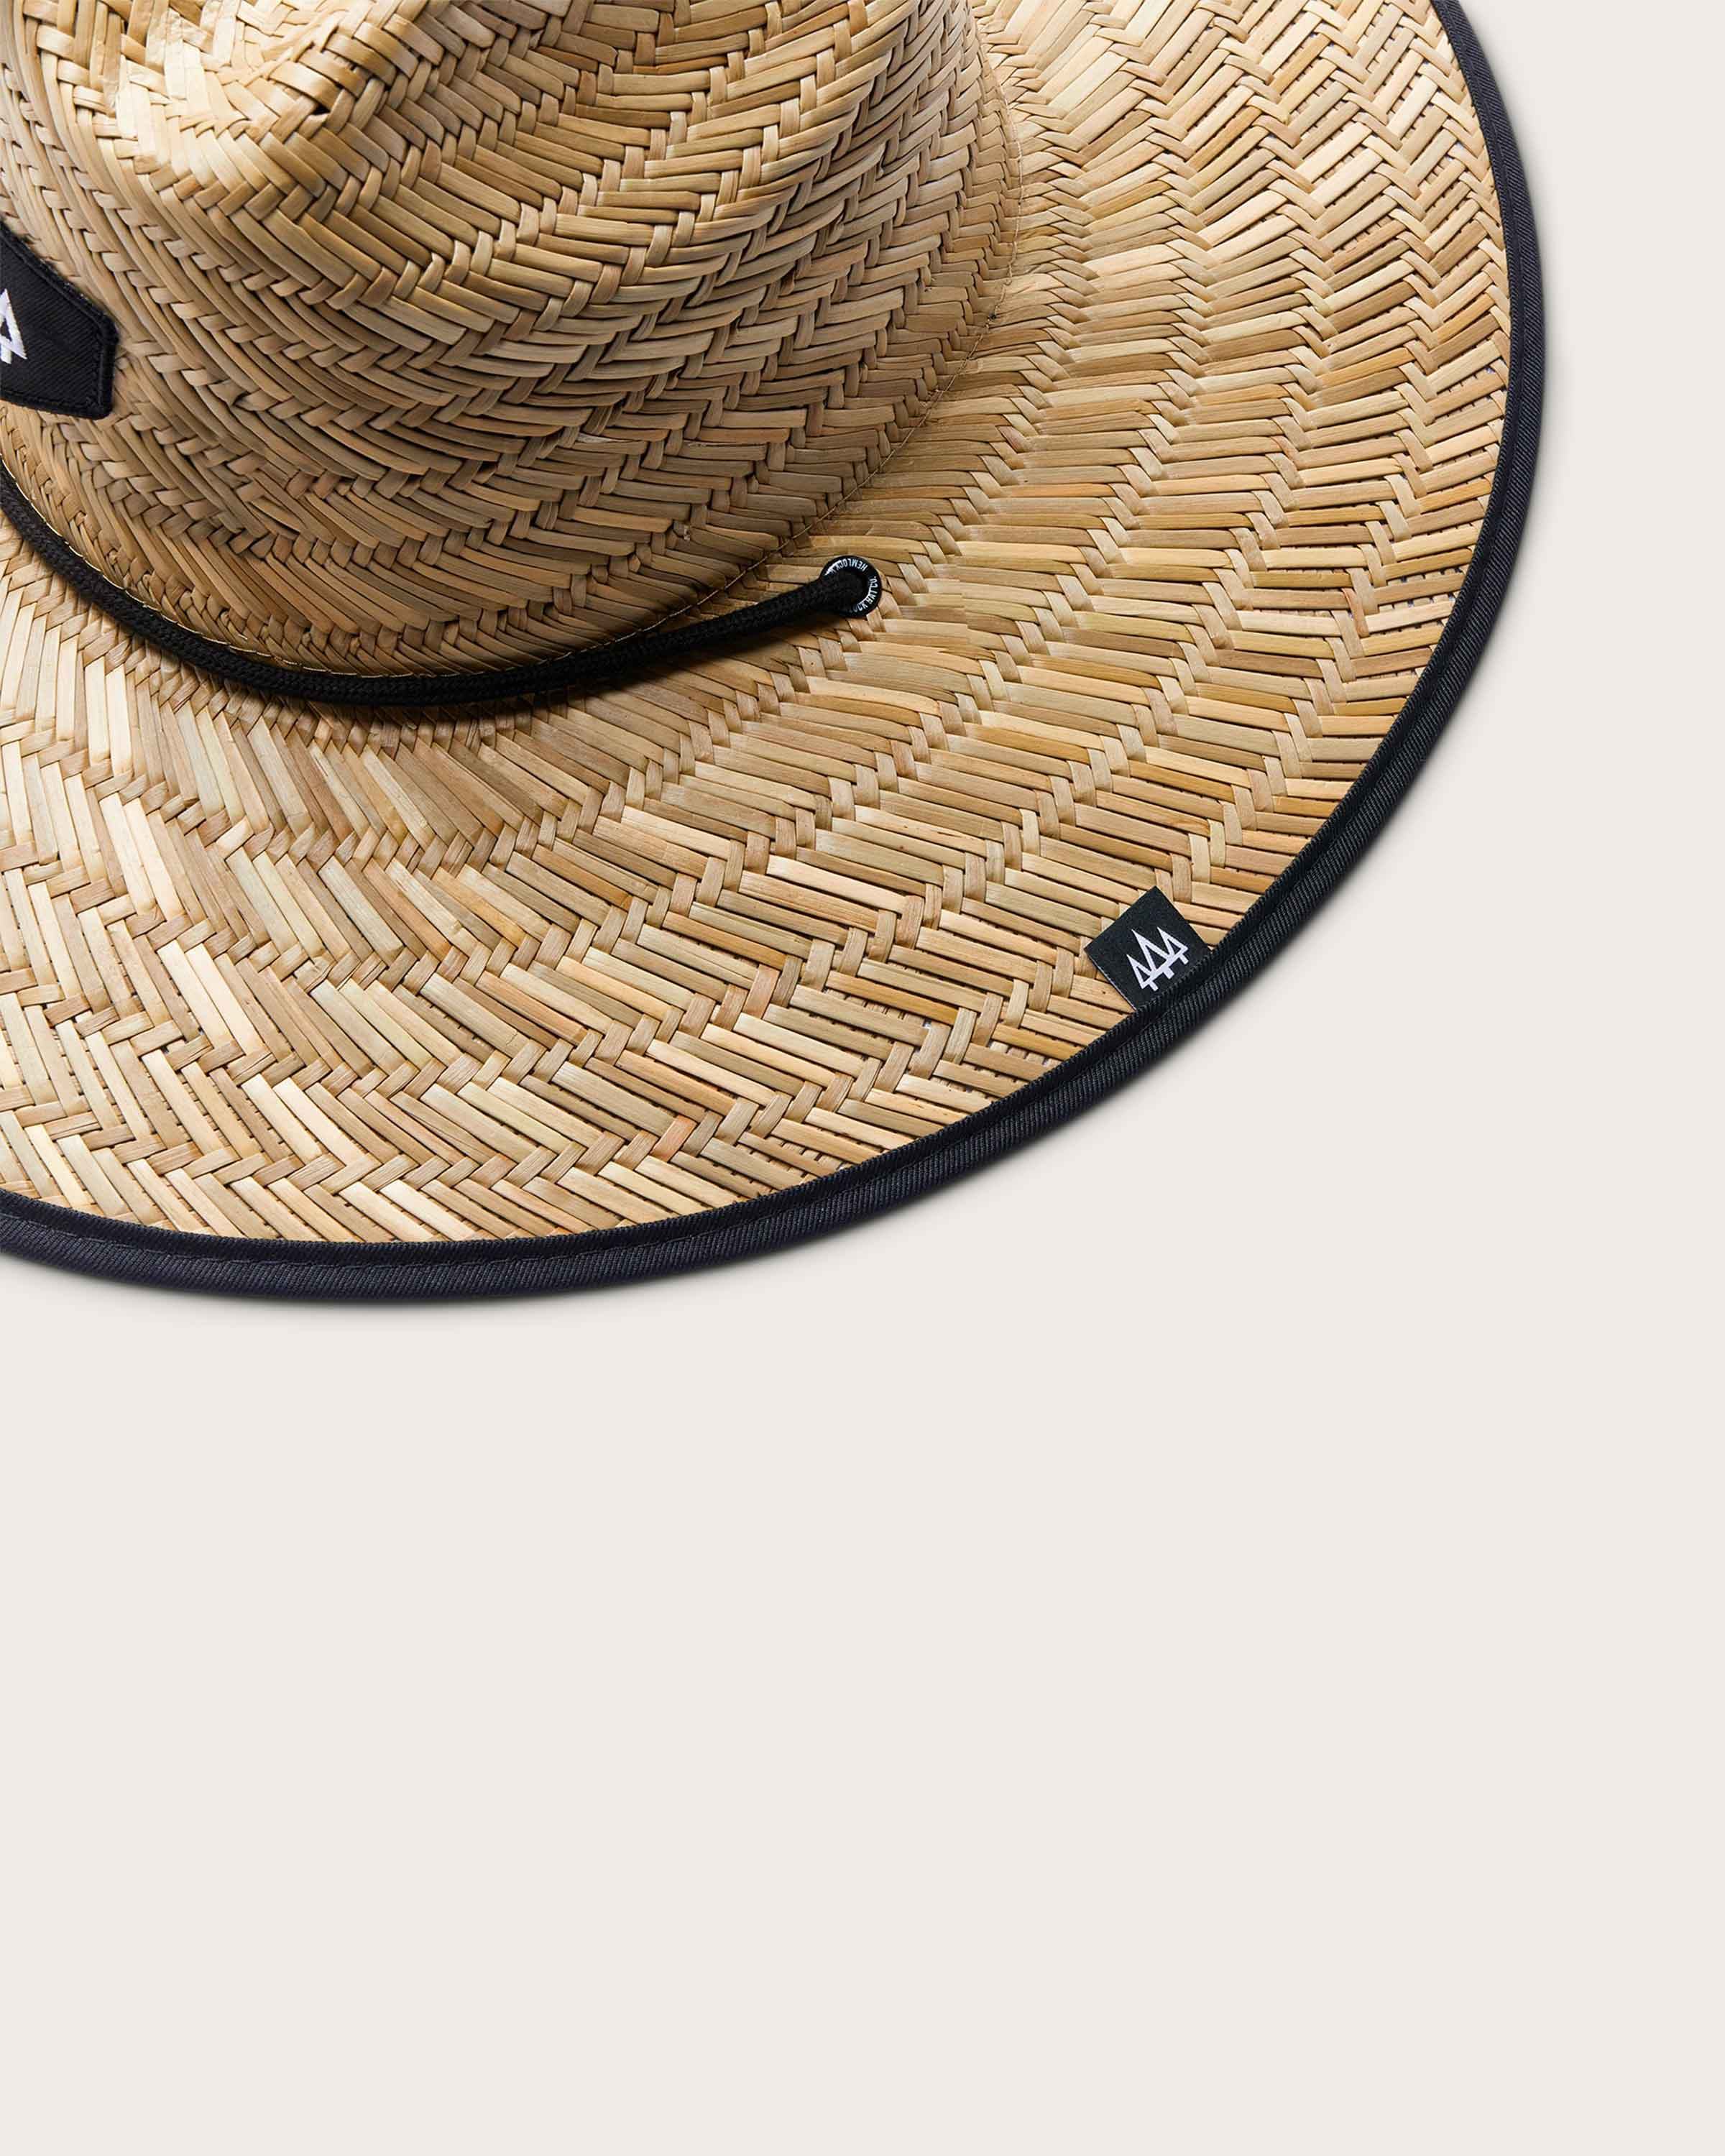 Midnight - undefined - Hemlock Hat Co. Lifeguards - Adults